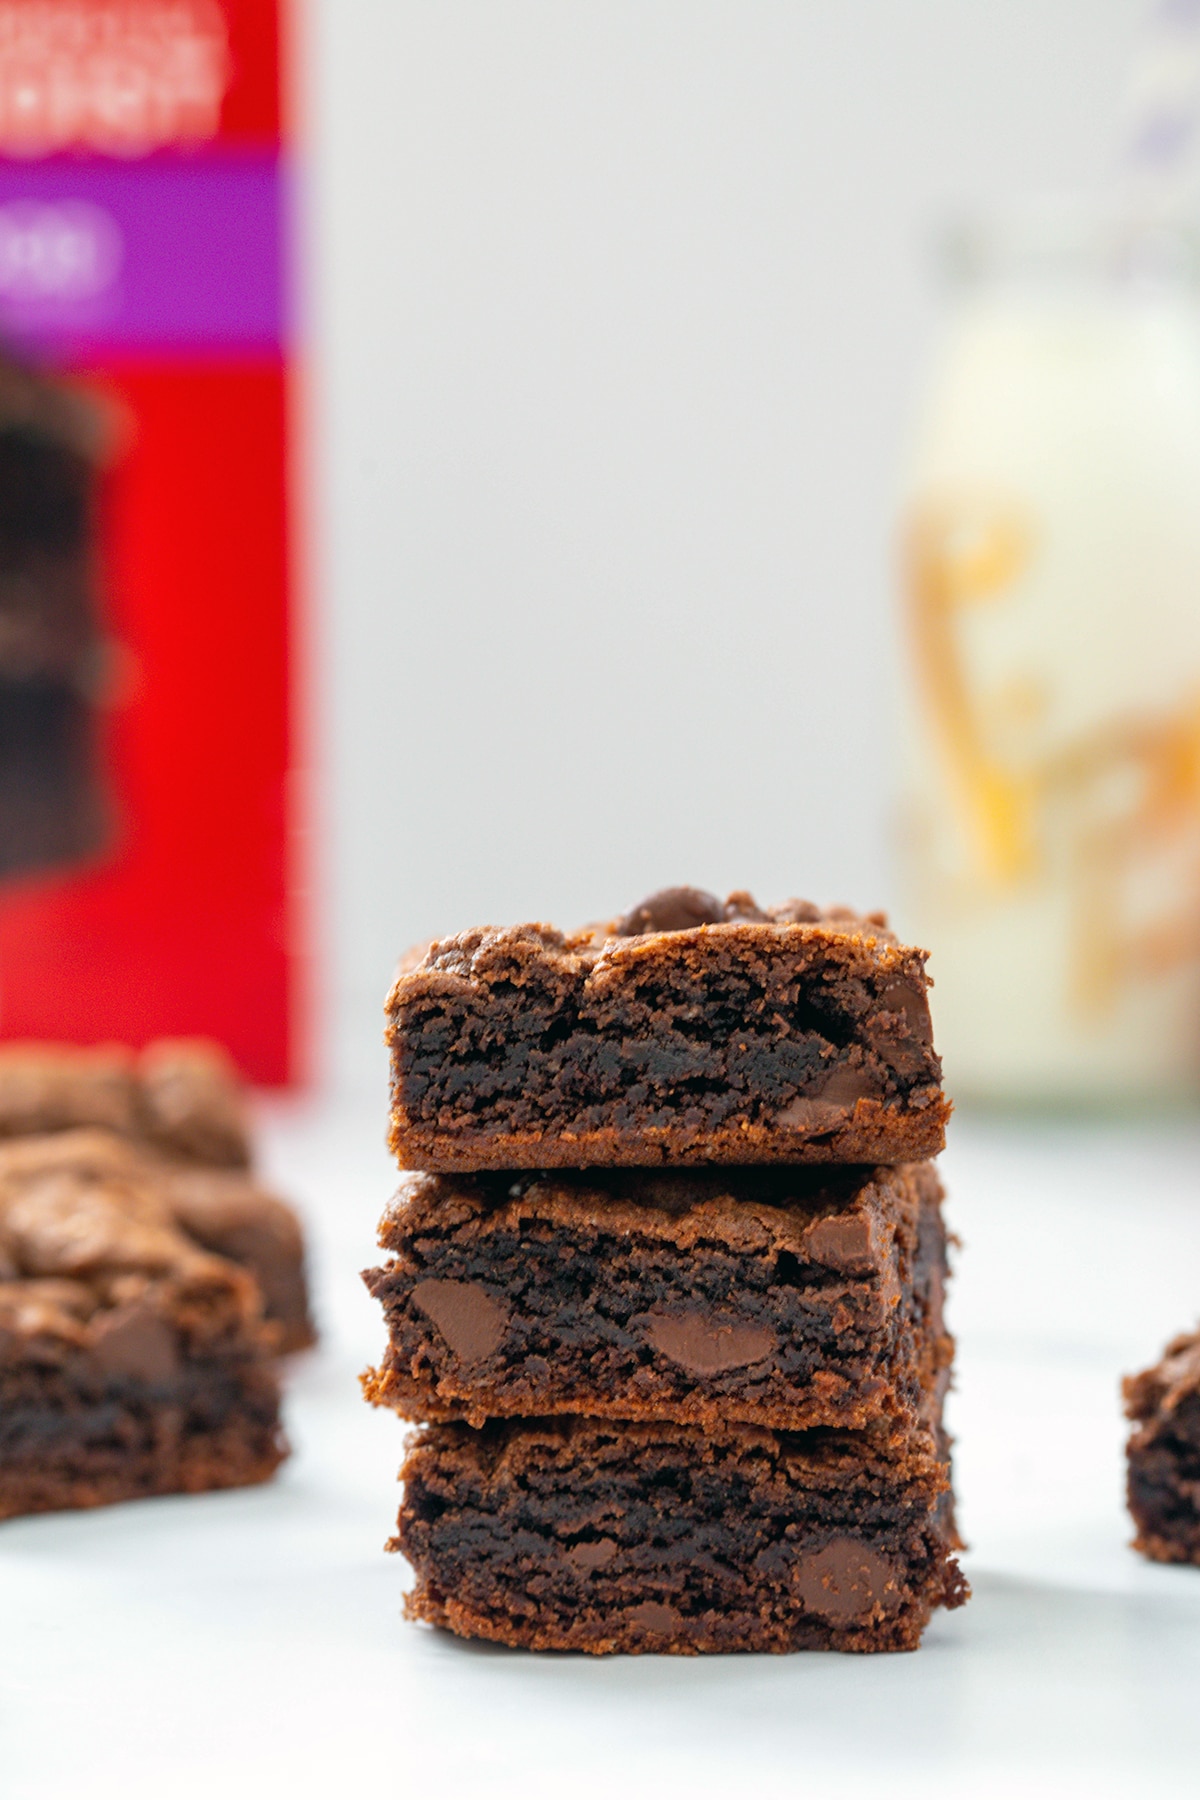 Head-on stack of cake mix brownies with cake mix box and glass of milk in background.